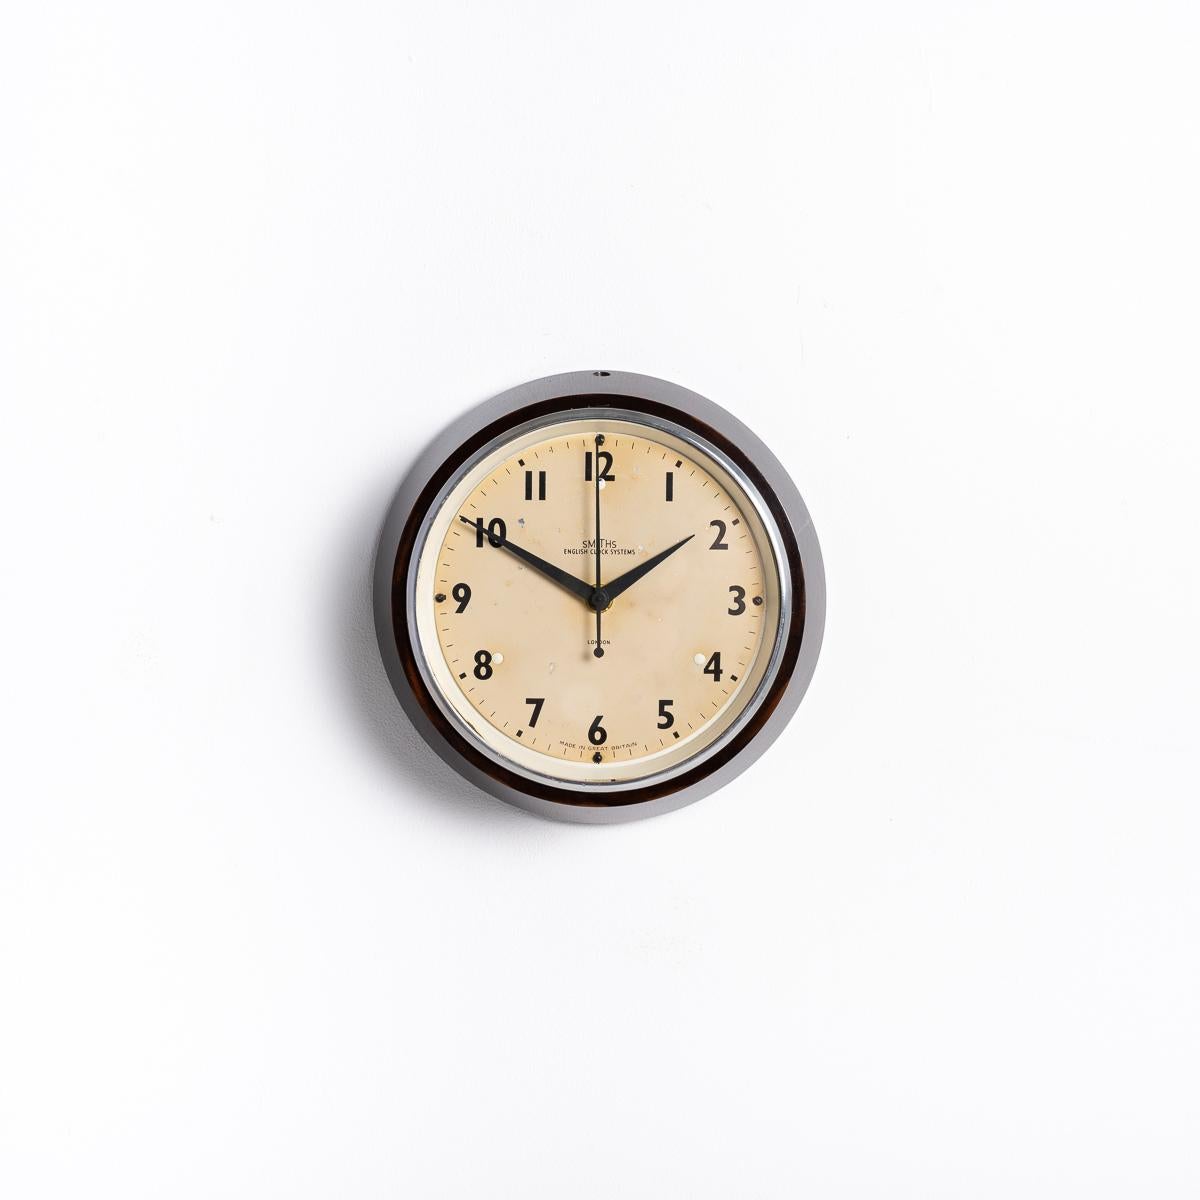 SMALL VINTAGE FACTORY WALL CLOCK BY SMITHS
A stunning find from a Brick Factory in Wales, upon conversion to living accommodation a bricked up store was discovered where 12 clocks were found. Of those 12, nine were identical Smiths English Clock